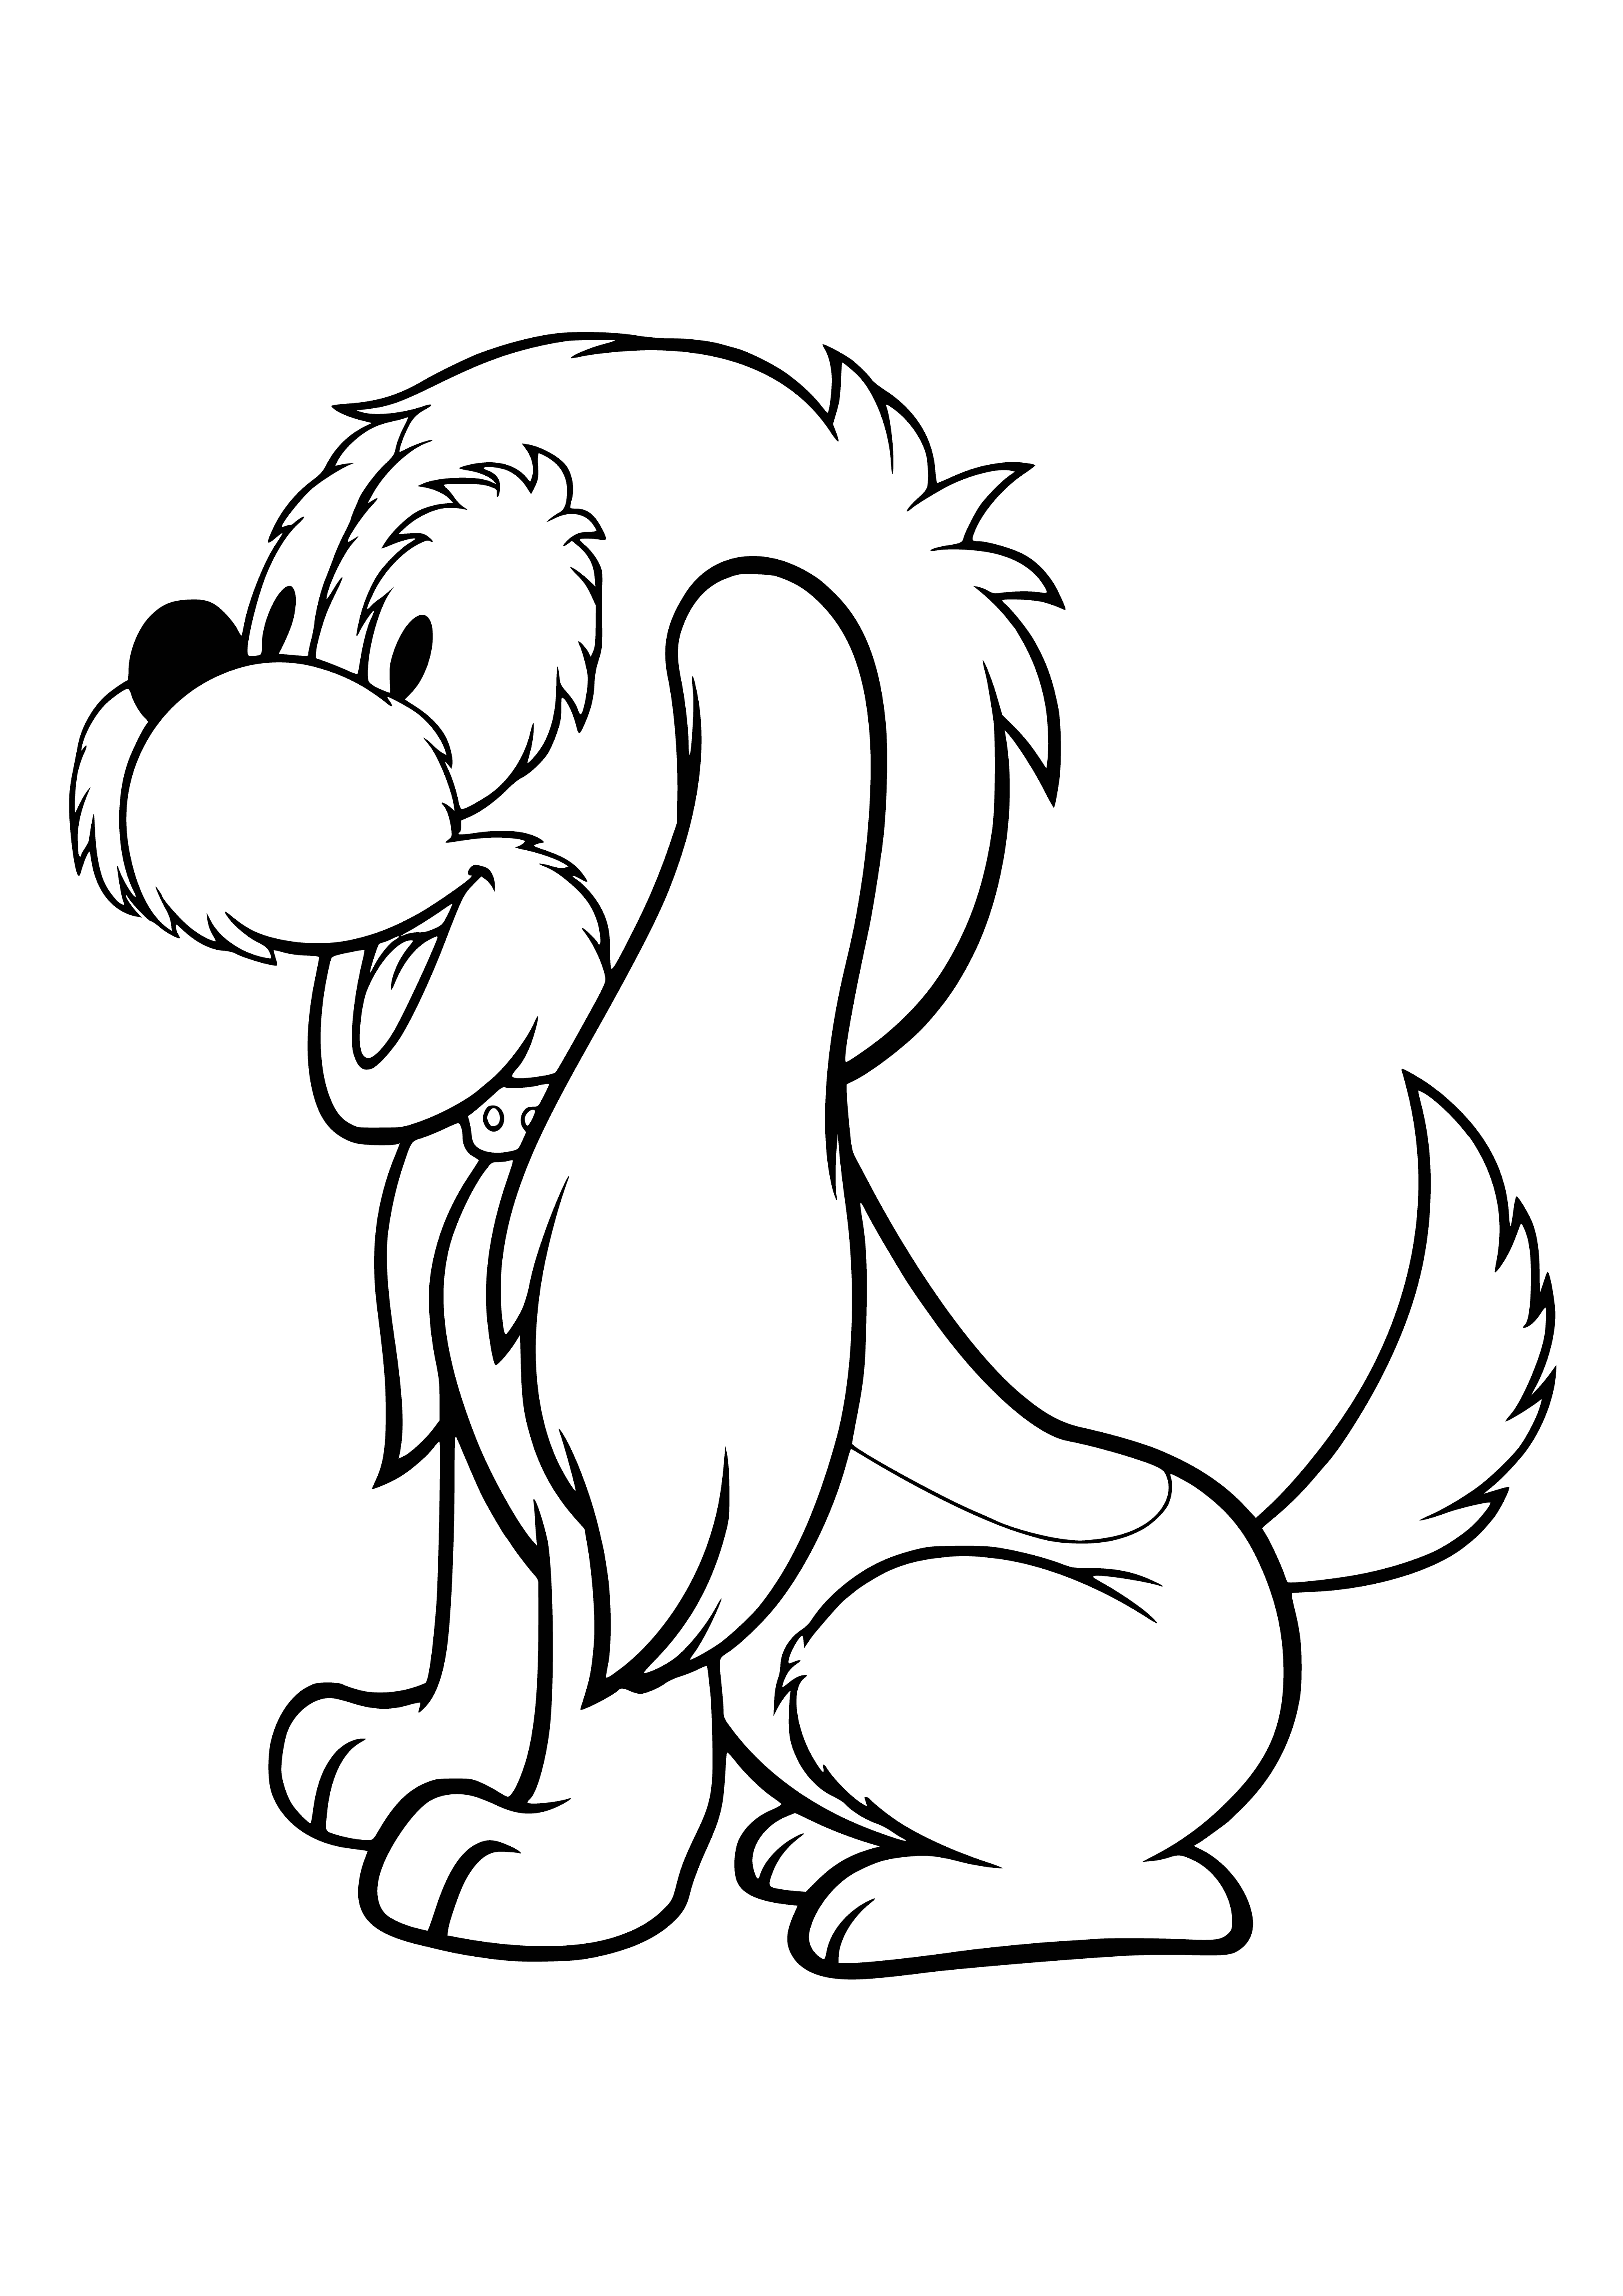 coloring page: Child hugs light brown puppy, laughing with their nose being licked. A yellow sun brightly gleams on the blue wall behind them.